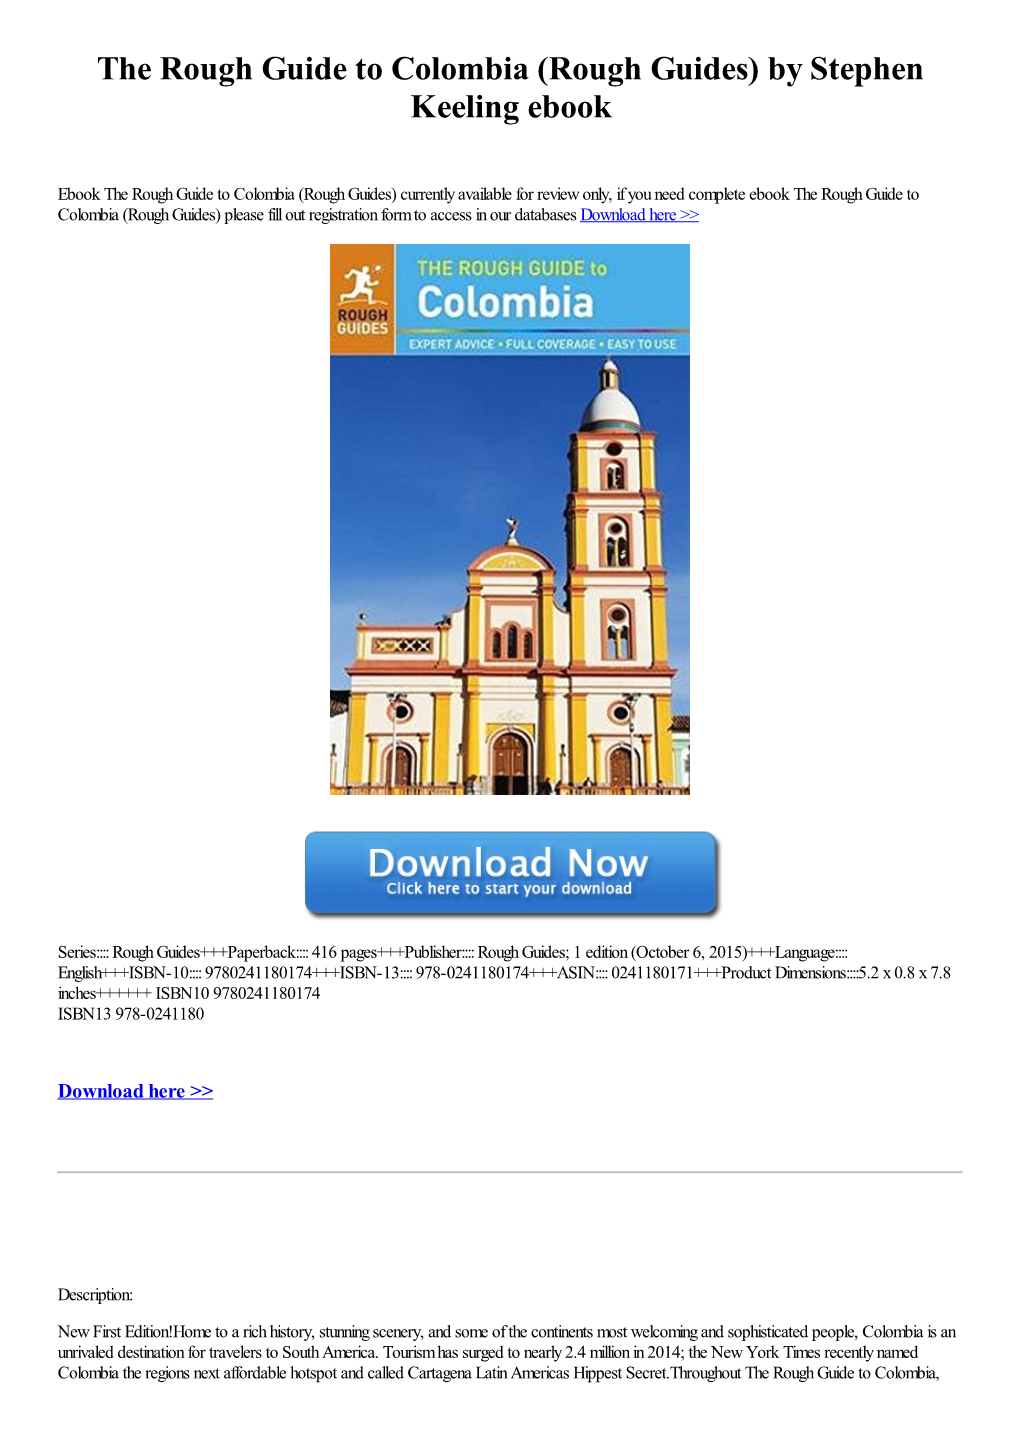 The Rough Guide to Colombia (Rough Guides) by Stephen Keeling [Ebook]